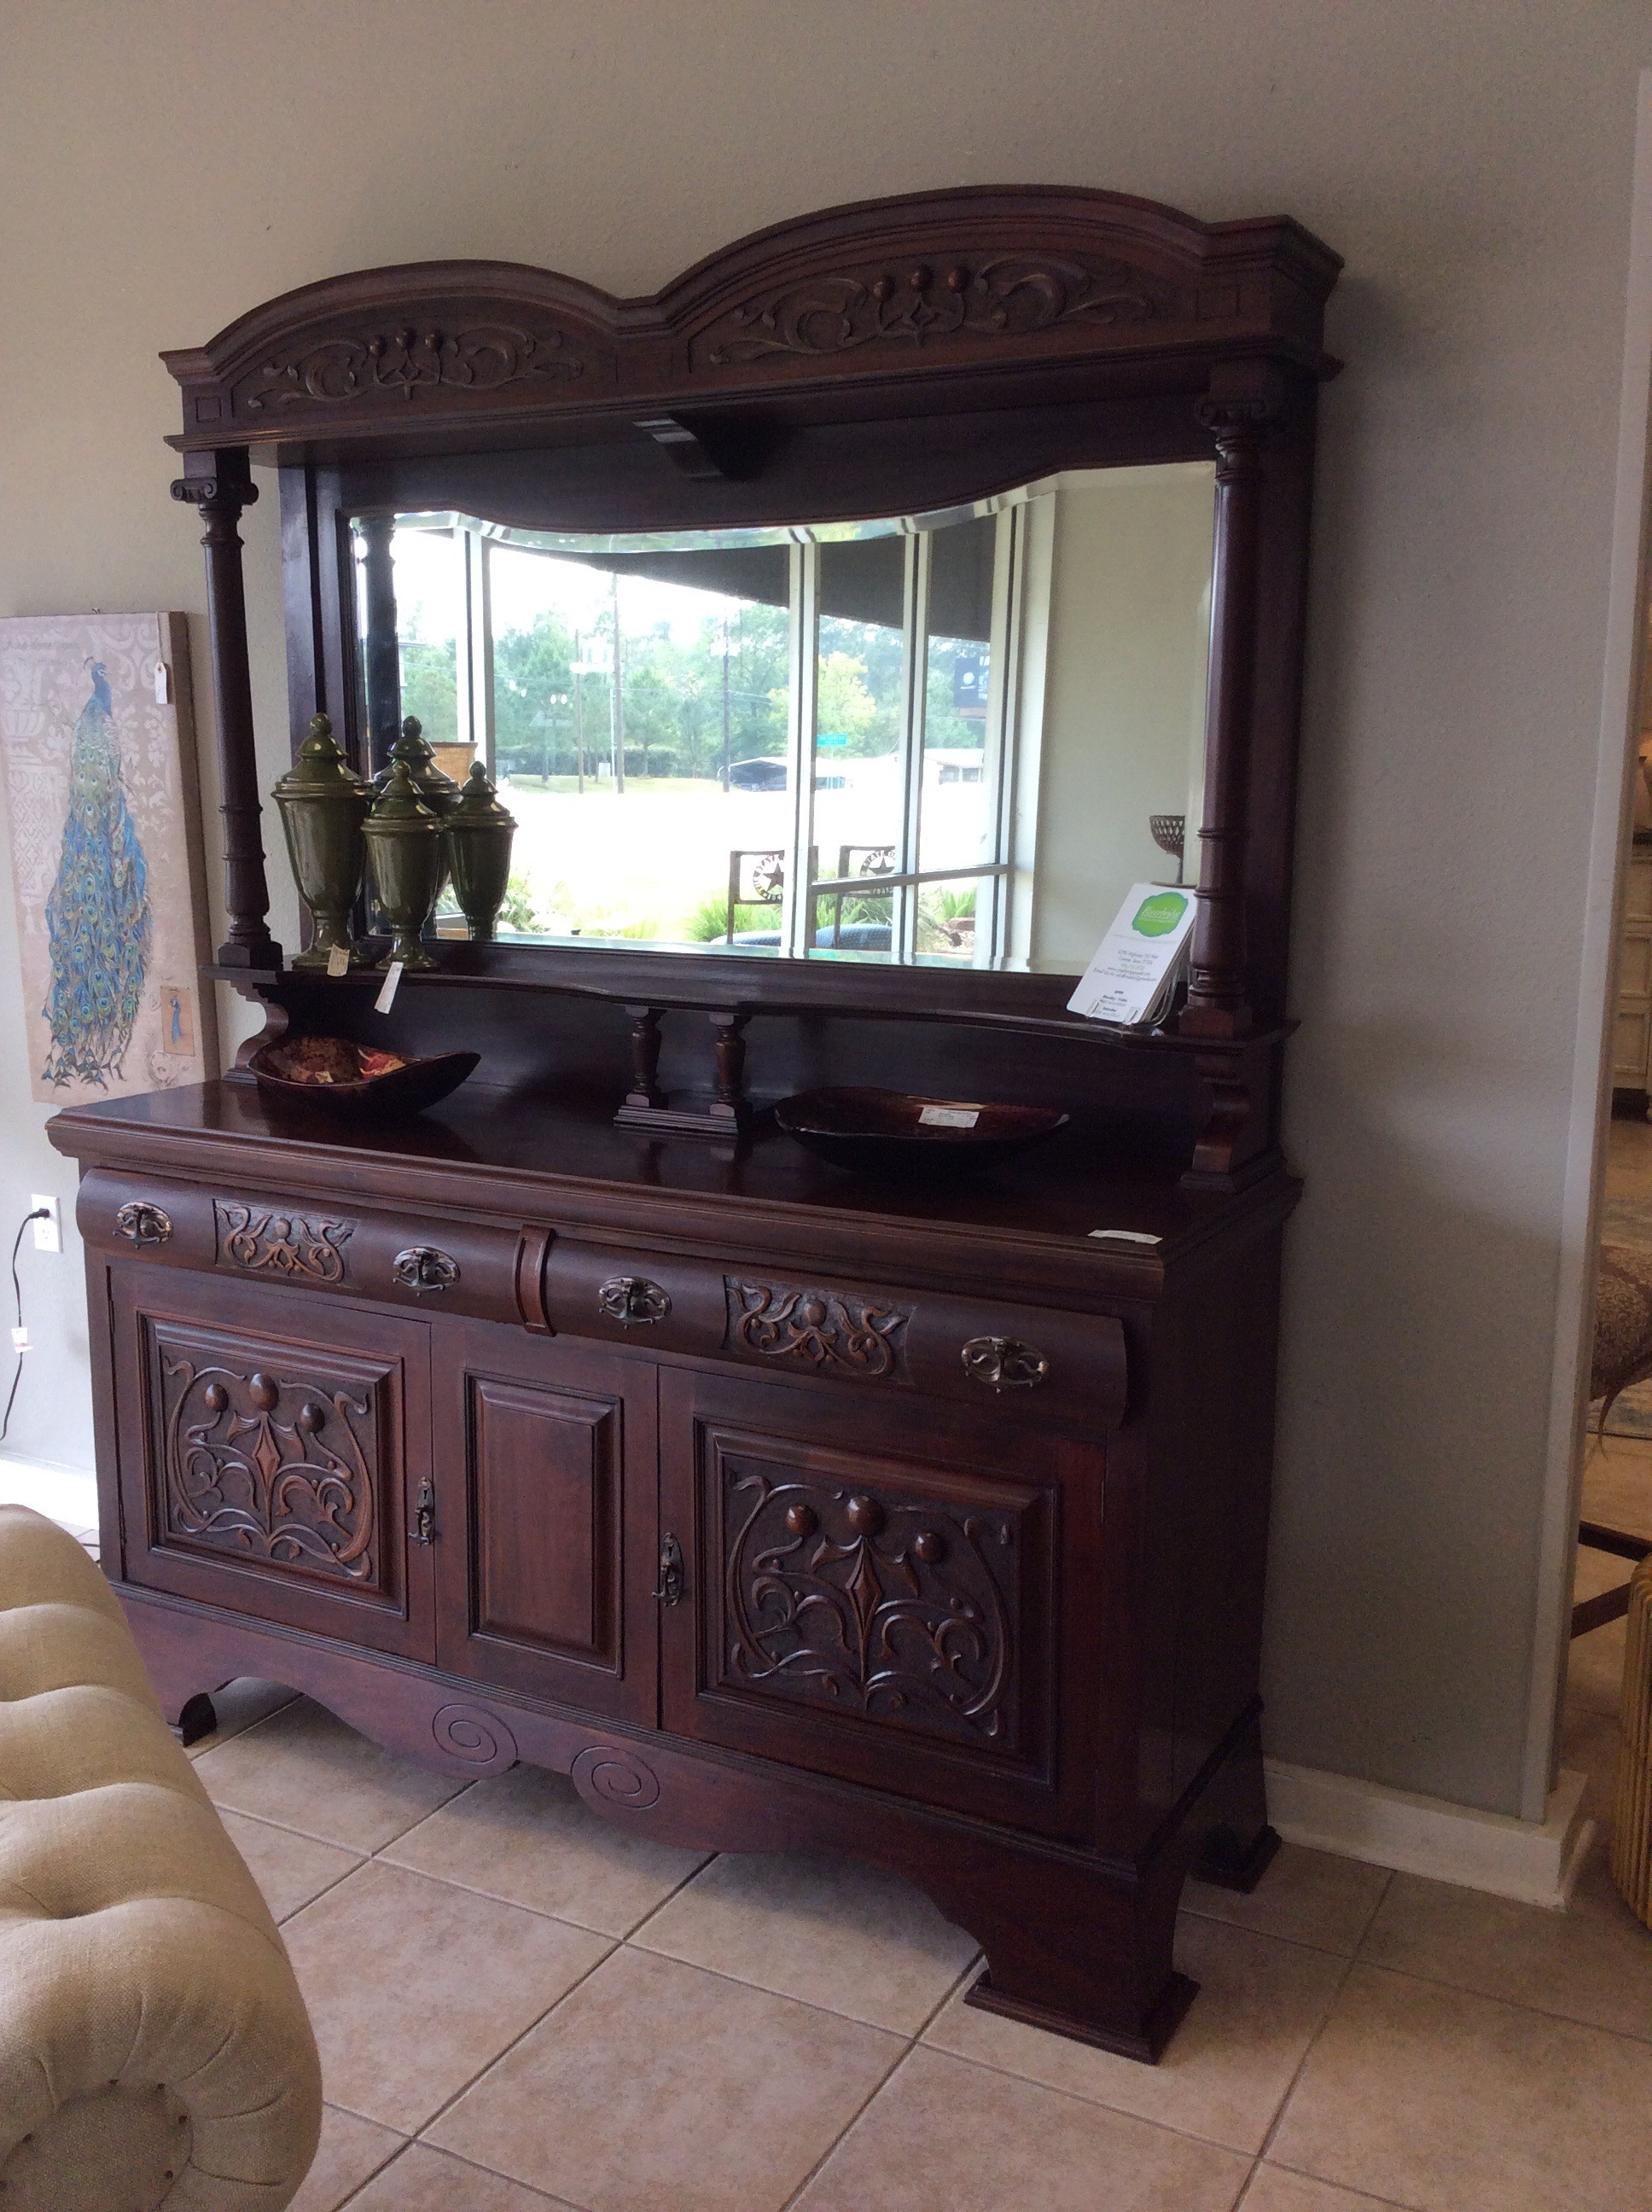 This could be called a statement piece indeed, it's large, bold and dramatic! It features a beauiful dark wood finish, lots of carved details,display/storage space, shelves and a beautiful beveled glass mirror.